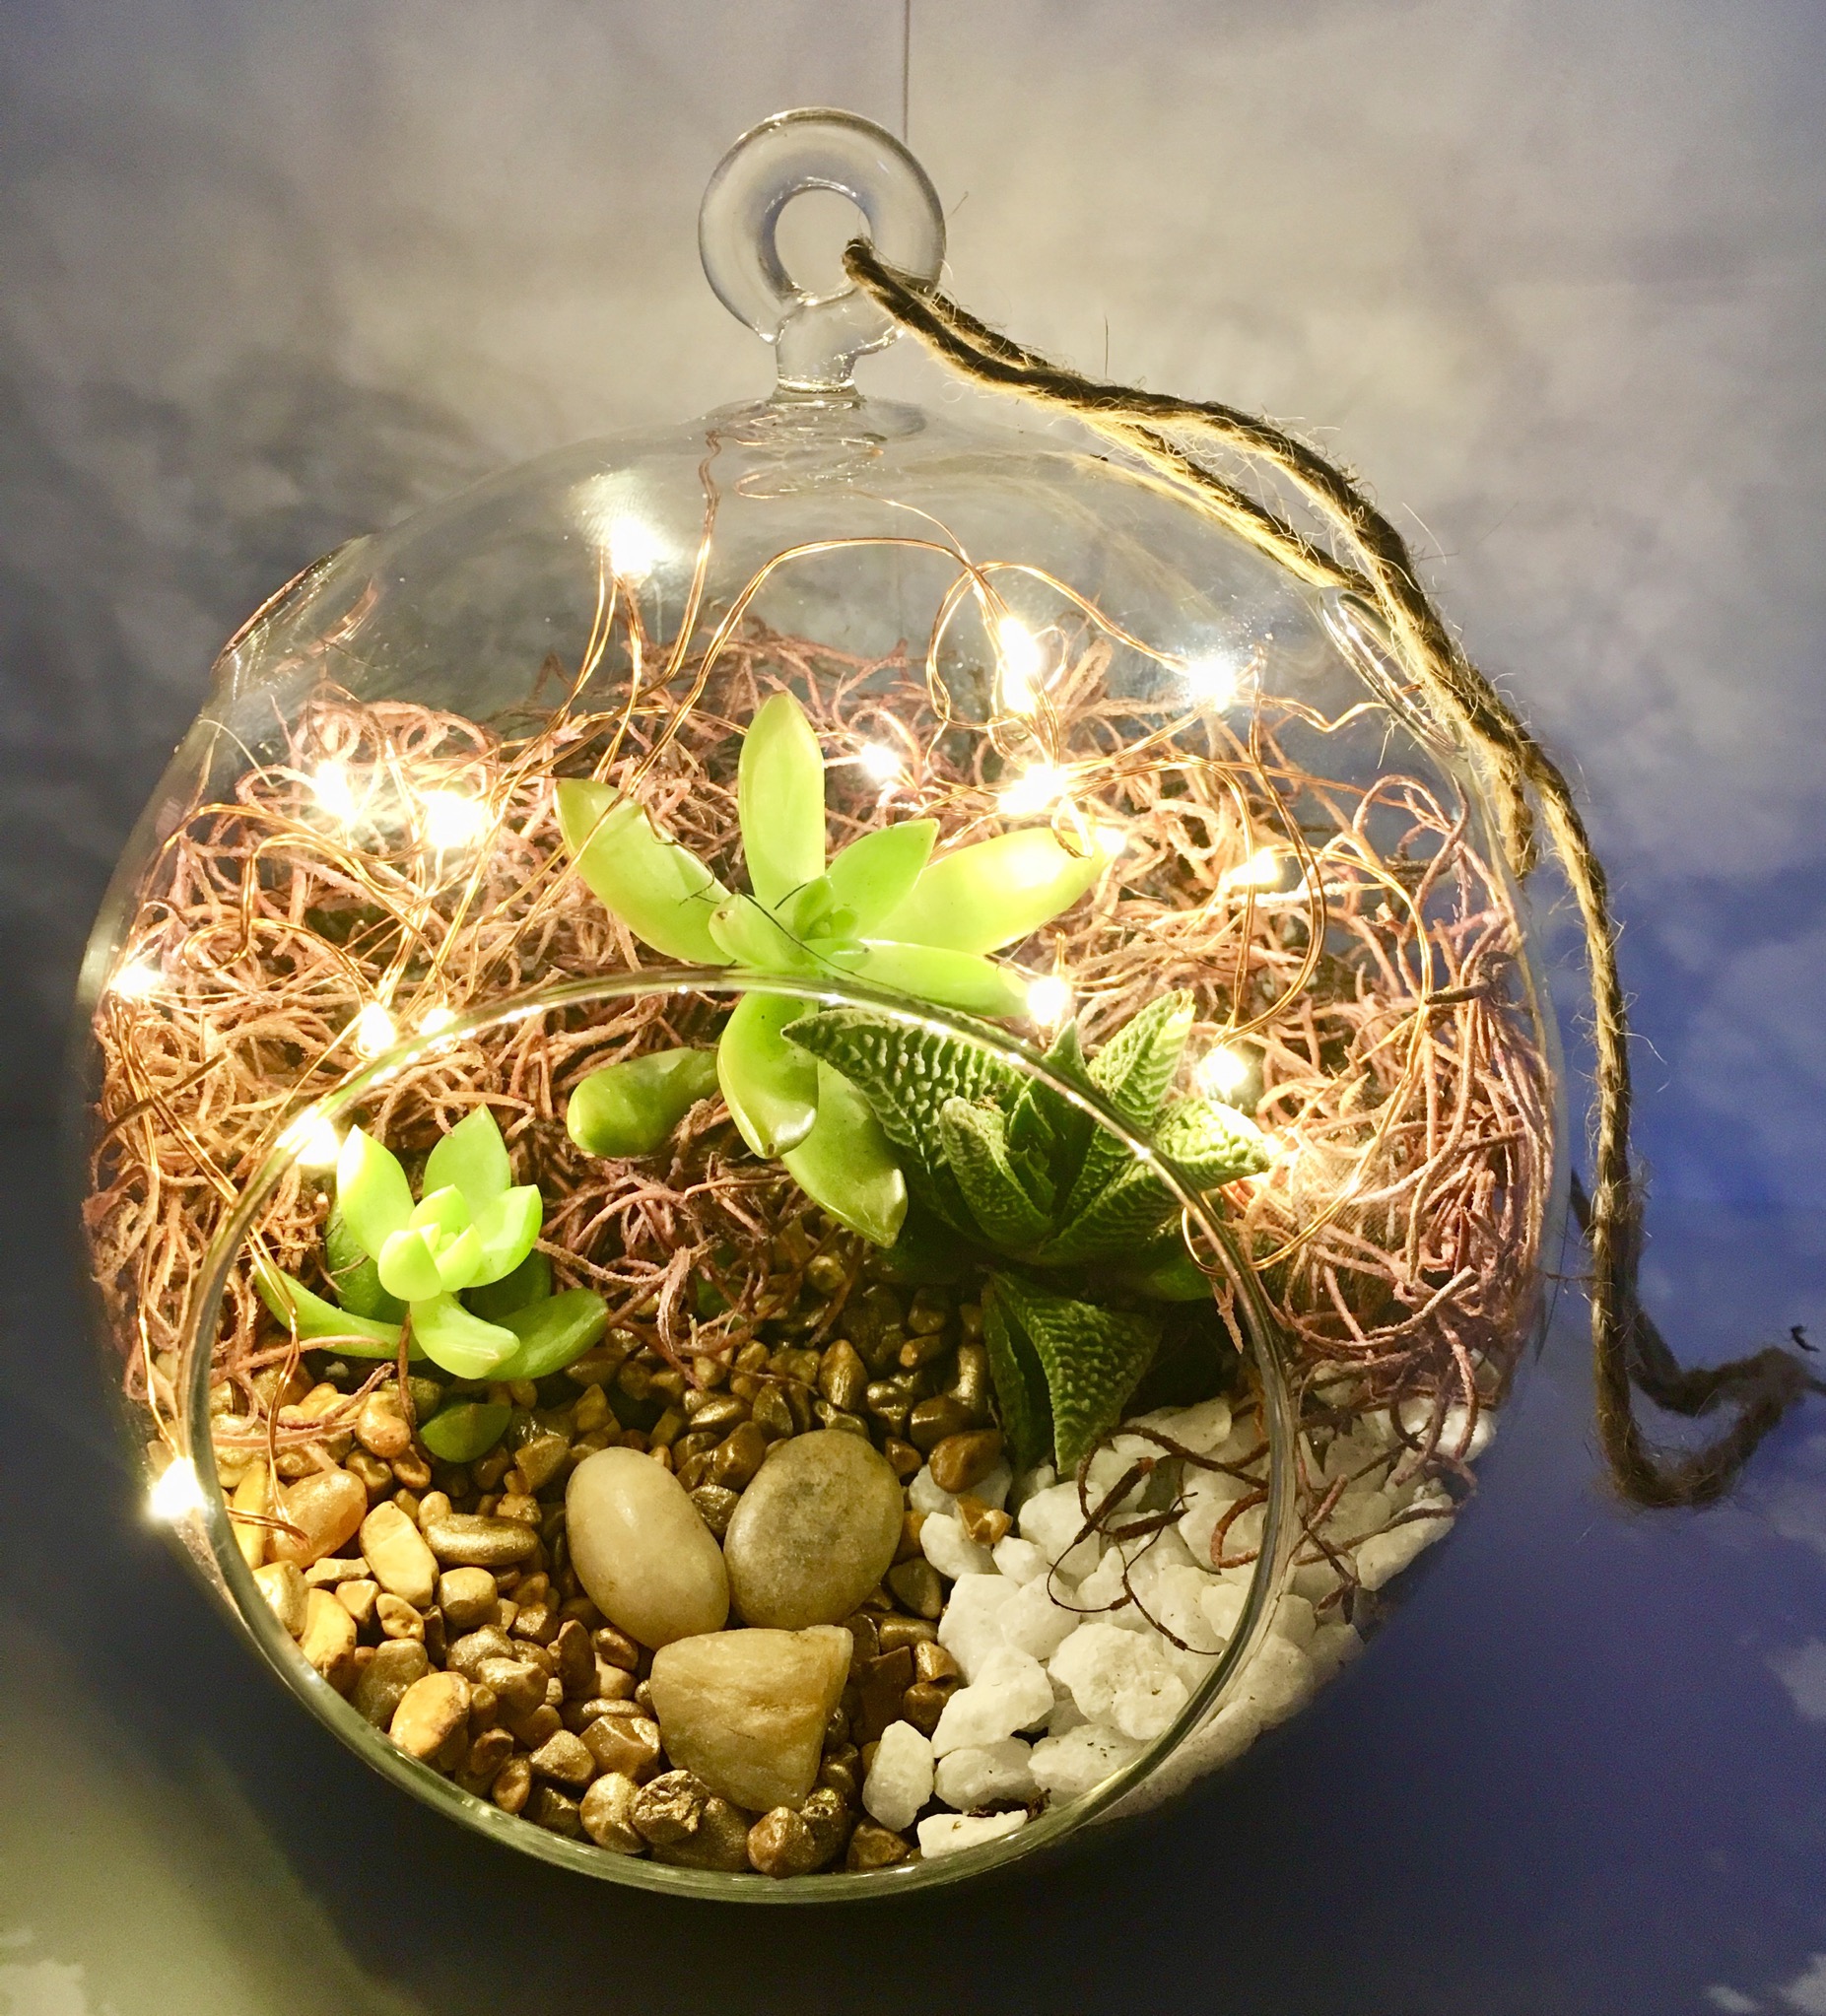 A Hanging Globe Succulent Terrarium w Fairy Lights plant nite project by Yaymaker